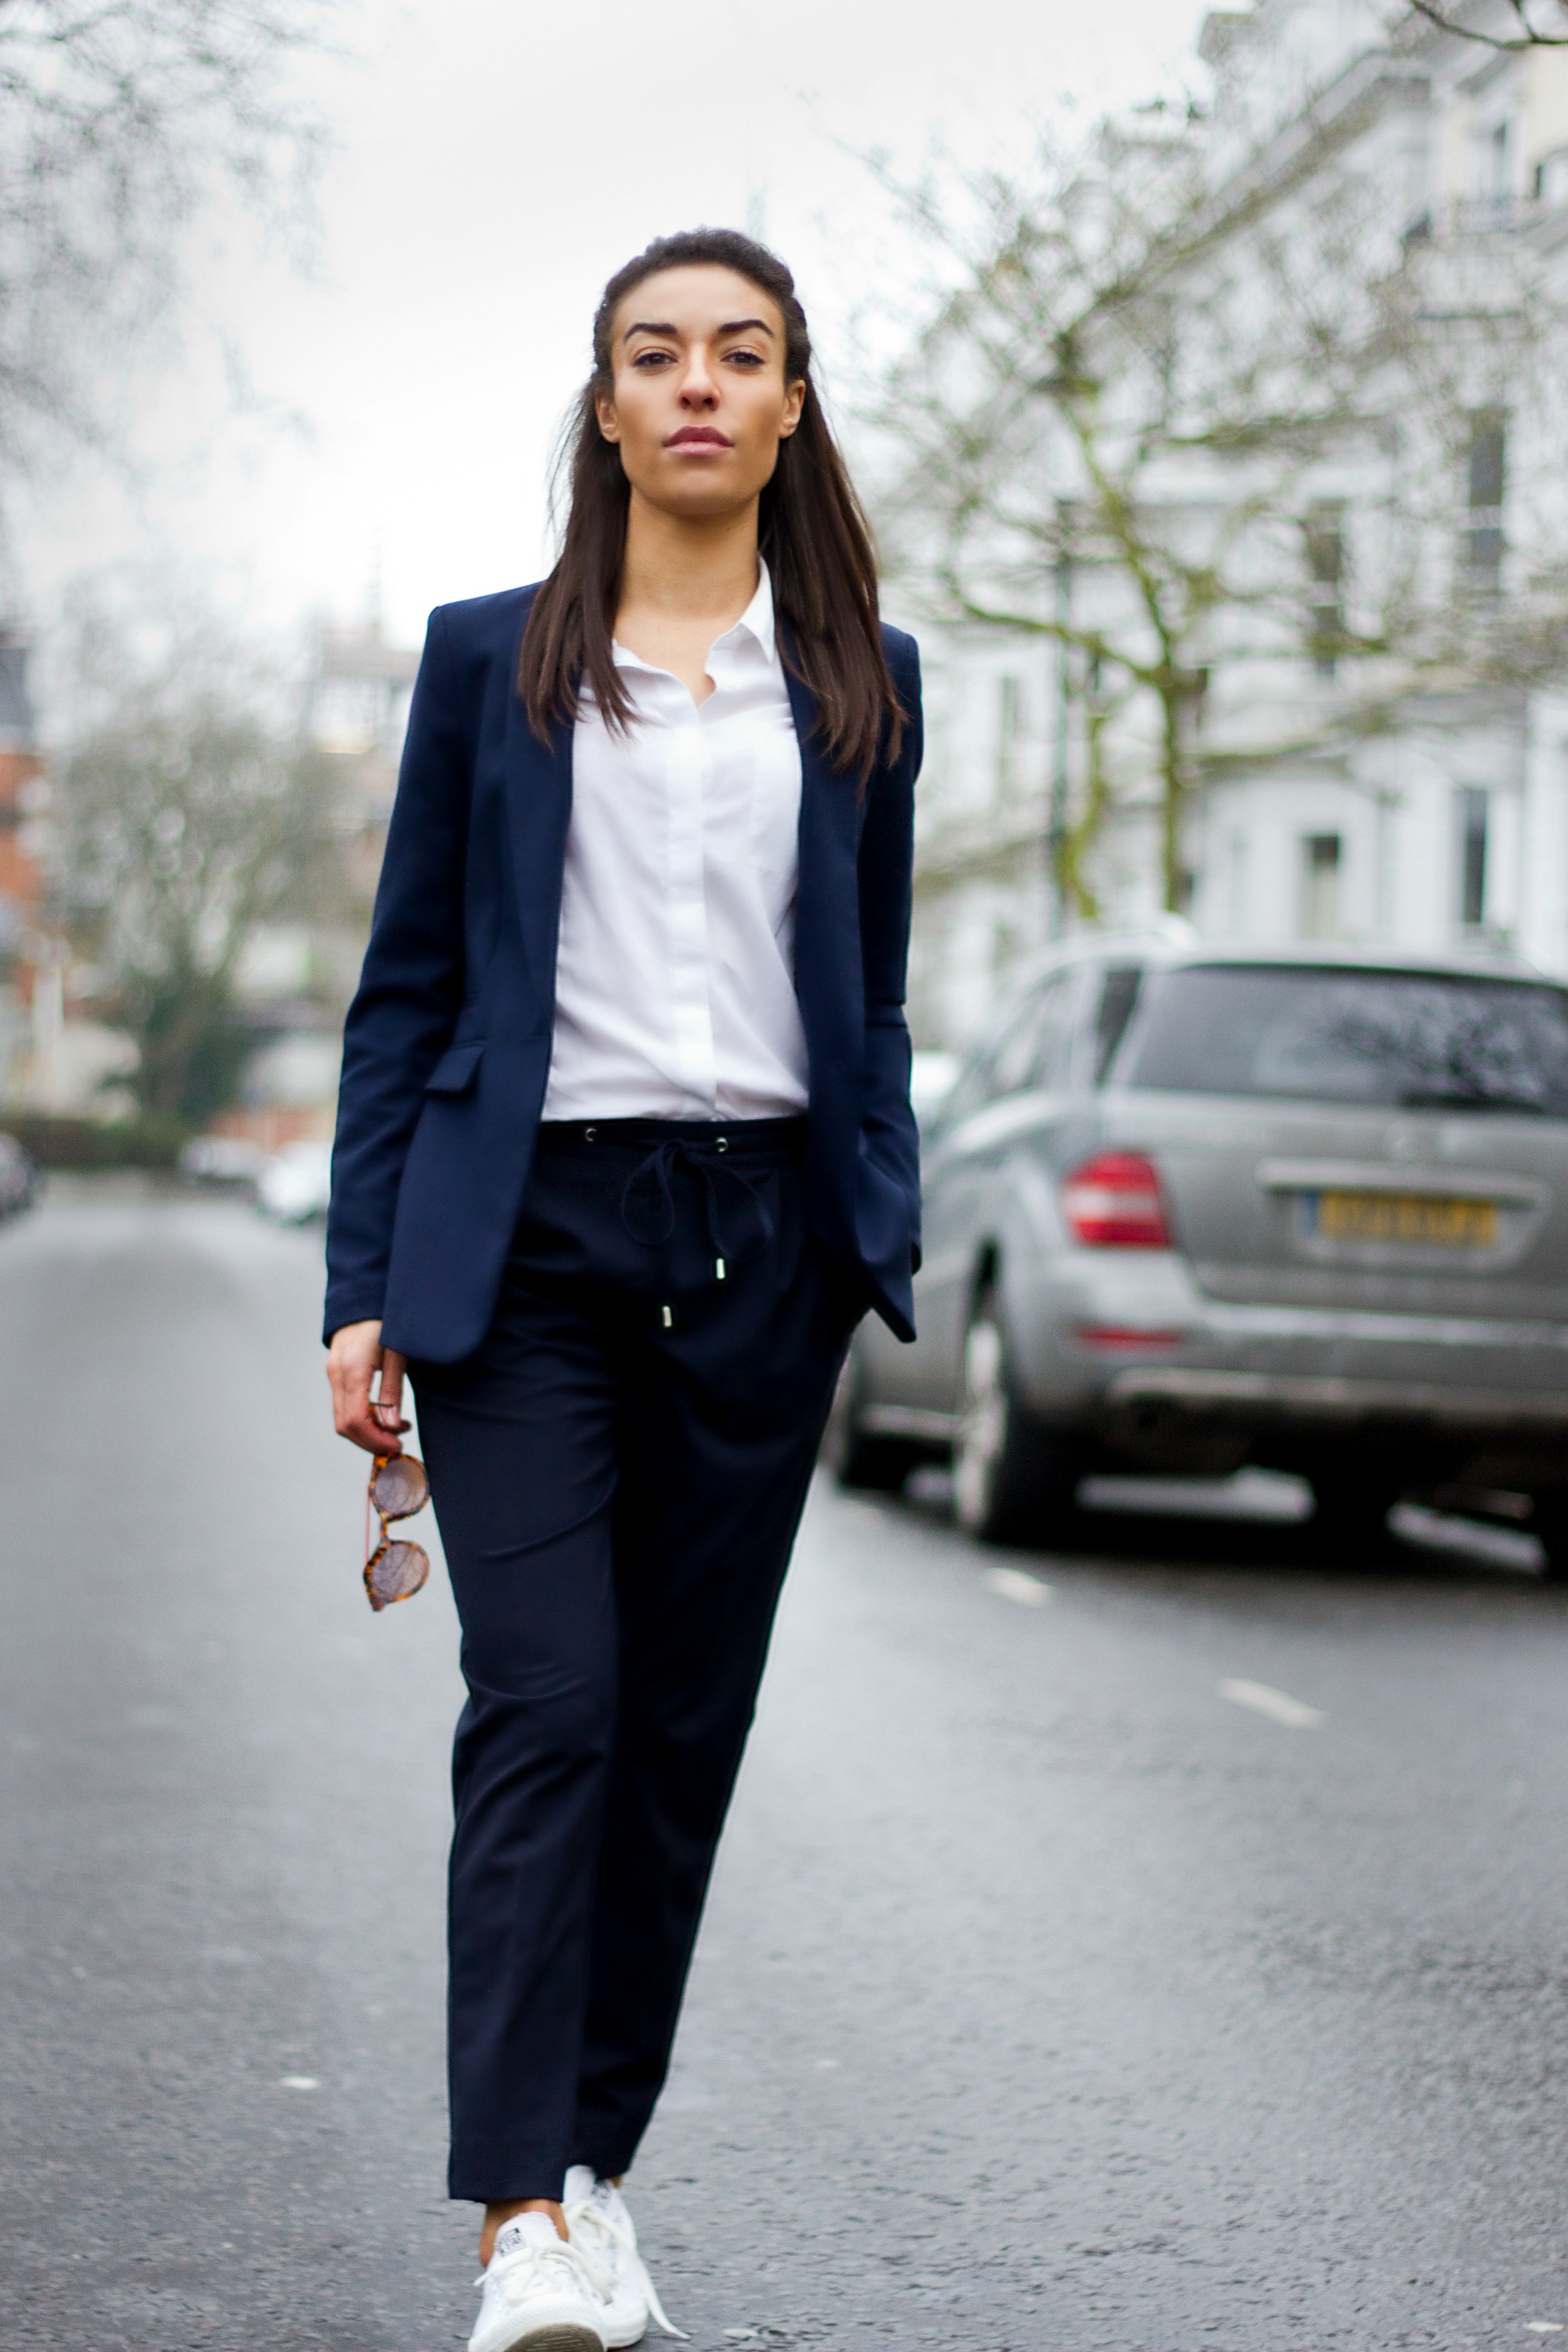 Corporate_Style_Story_Navy_Drawstring_Trousers_White_Shirt-Navy_Blazer_Holding_Sunglasses_In_Road_2212_3318